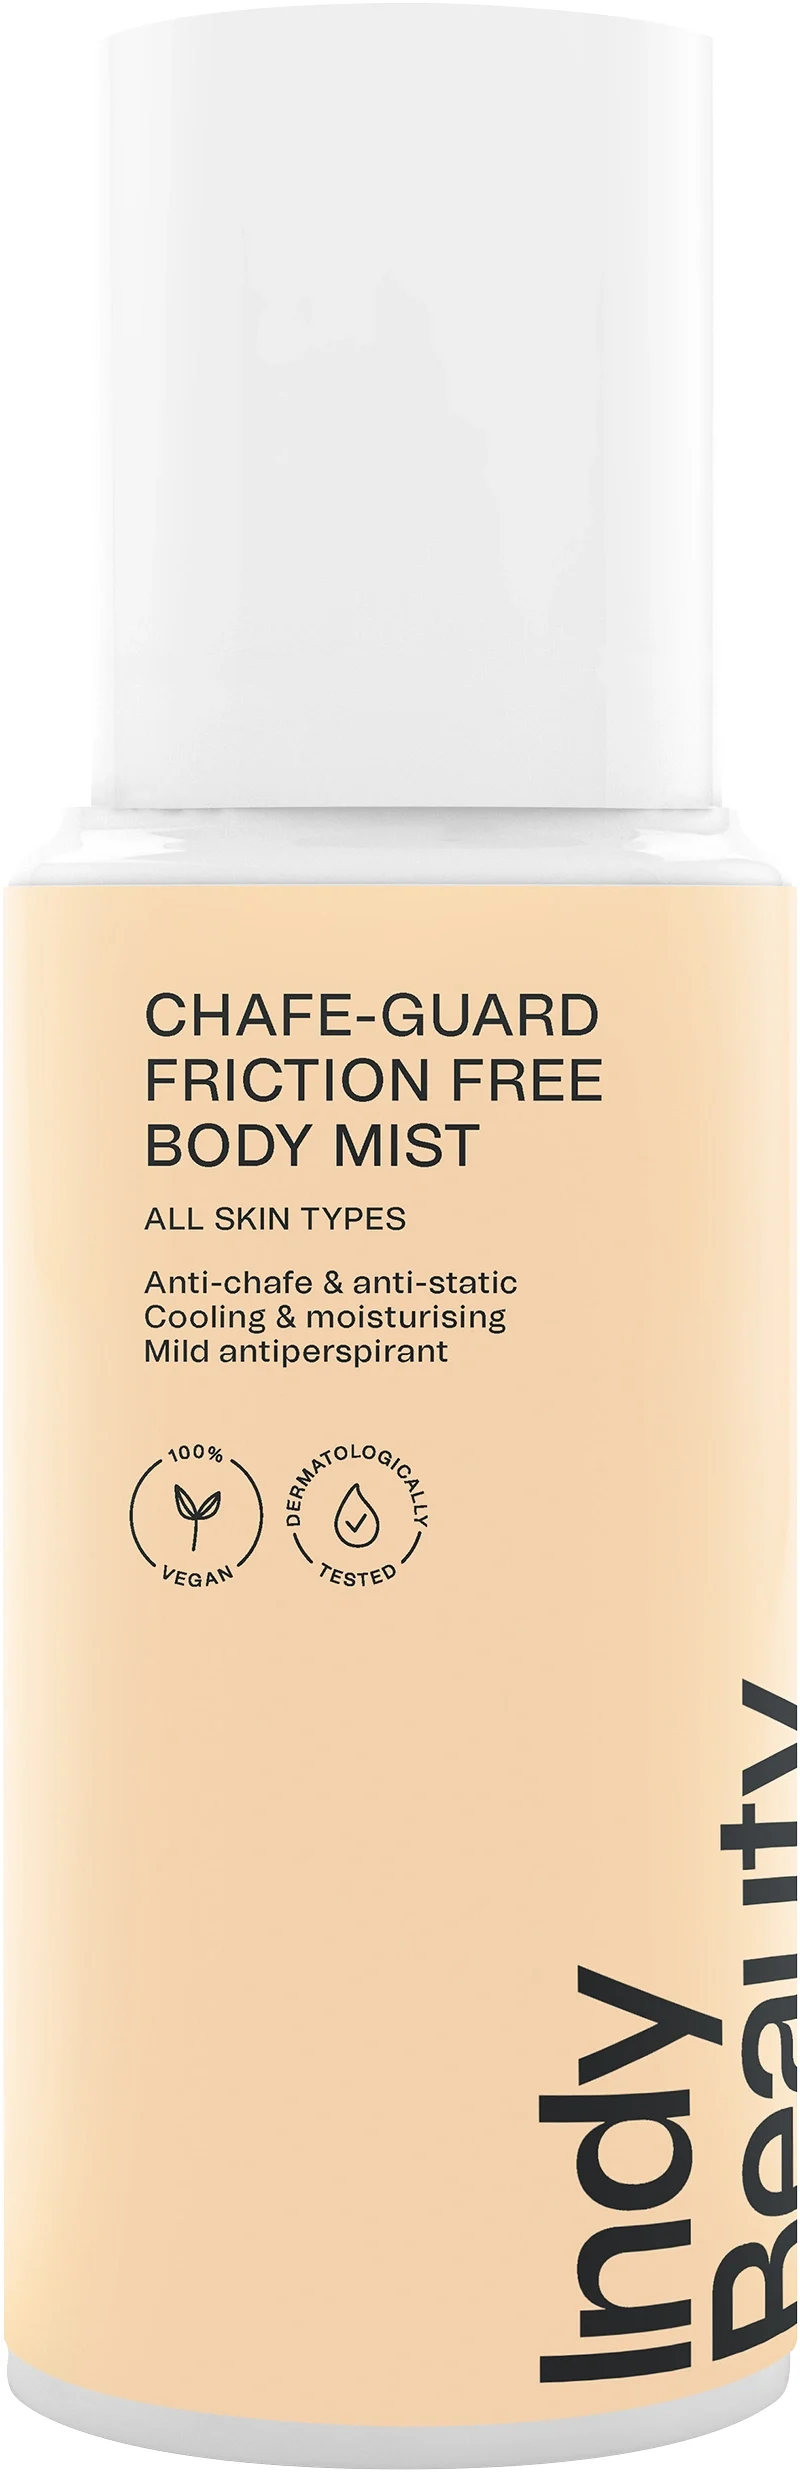 Indy Beauty Chafe-guard Friction Free Body Mist 100 ml